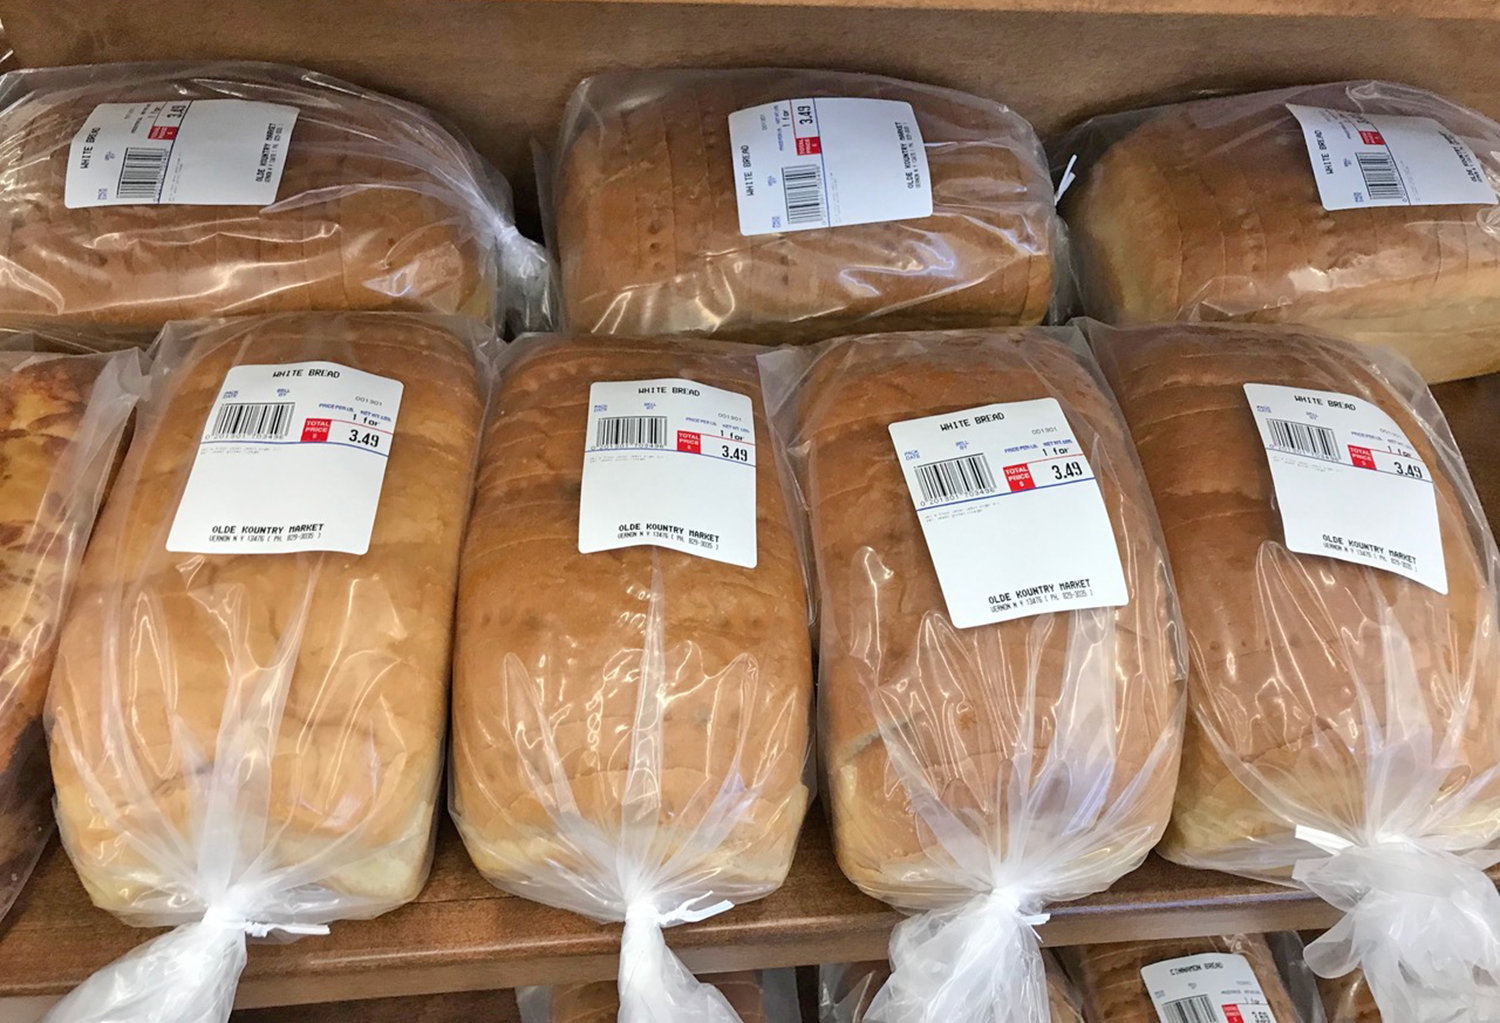 Fresh-baked bread is a highlight of a trip to Olde Kountry Market on Route 5 in Vernon.